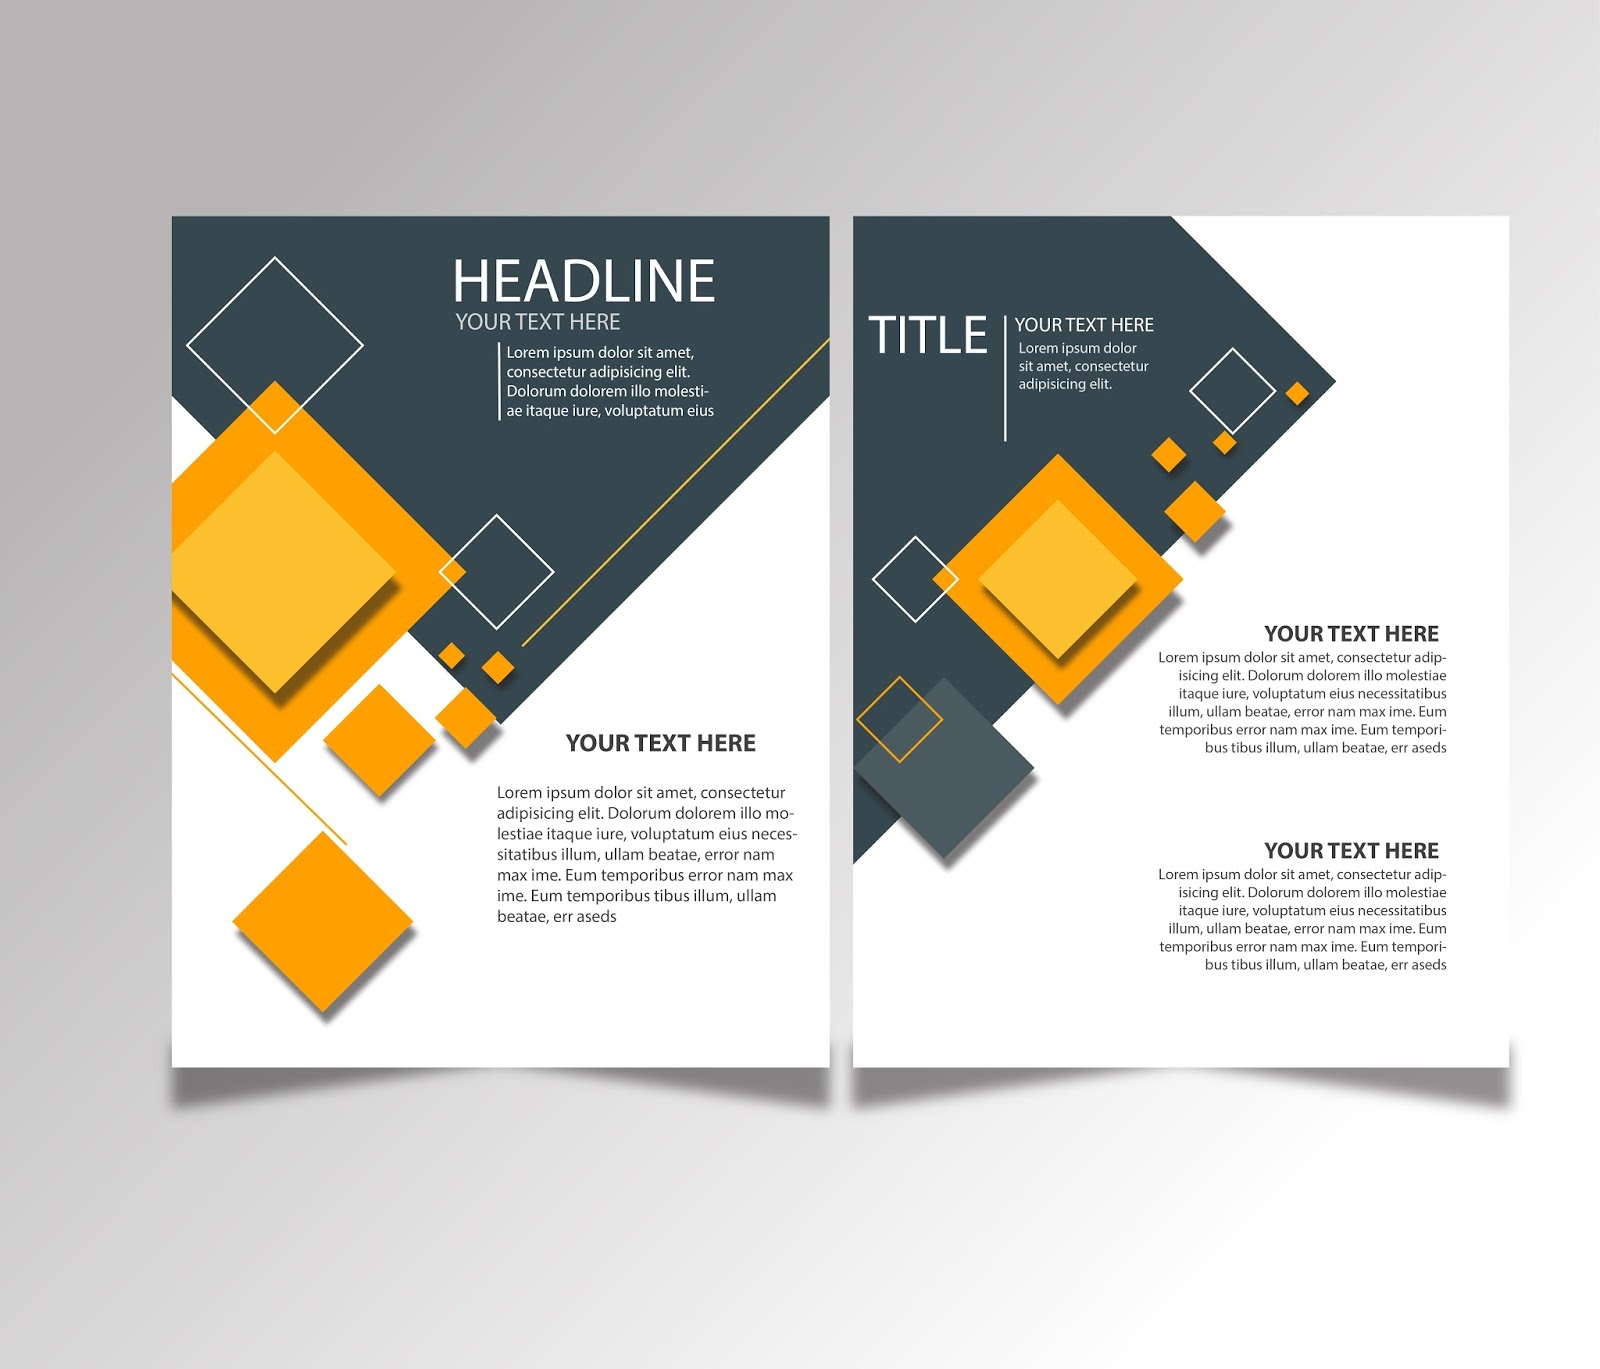 FREE DOWNLOAD BROCHURE DESIGN TEMPLATES AI FILES - Ideosprocess